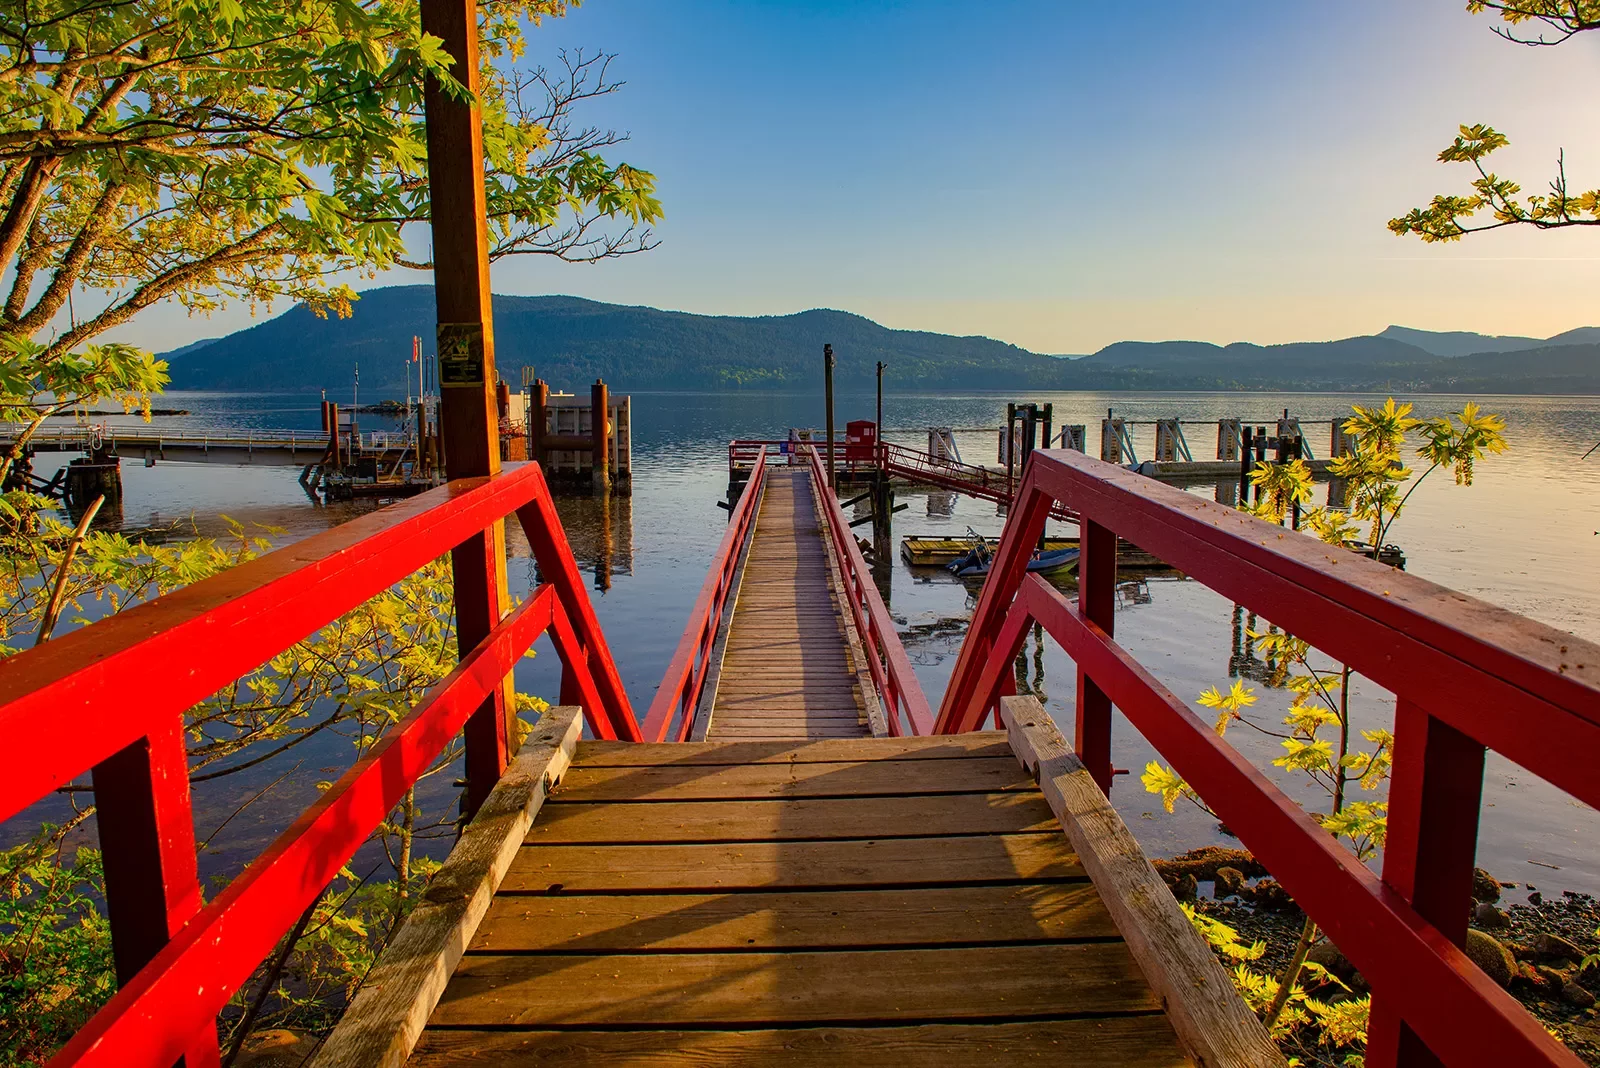 View of the ferry dock at Vesuvius Bay on Salt Spring Island, British Columbia, Canada